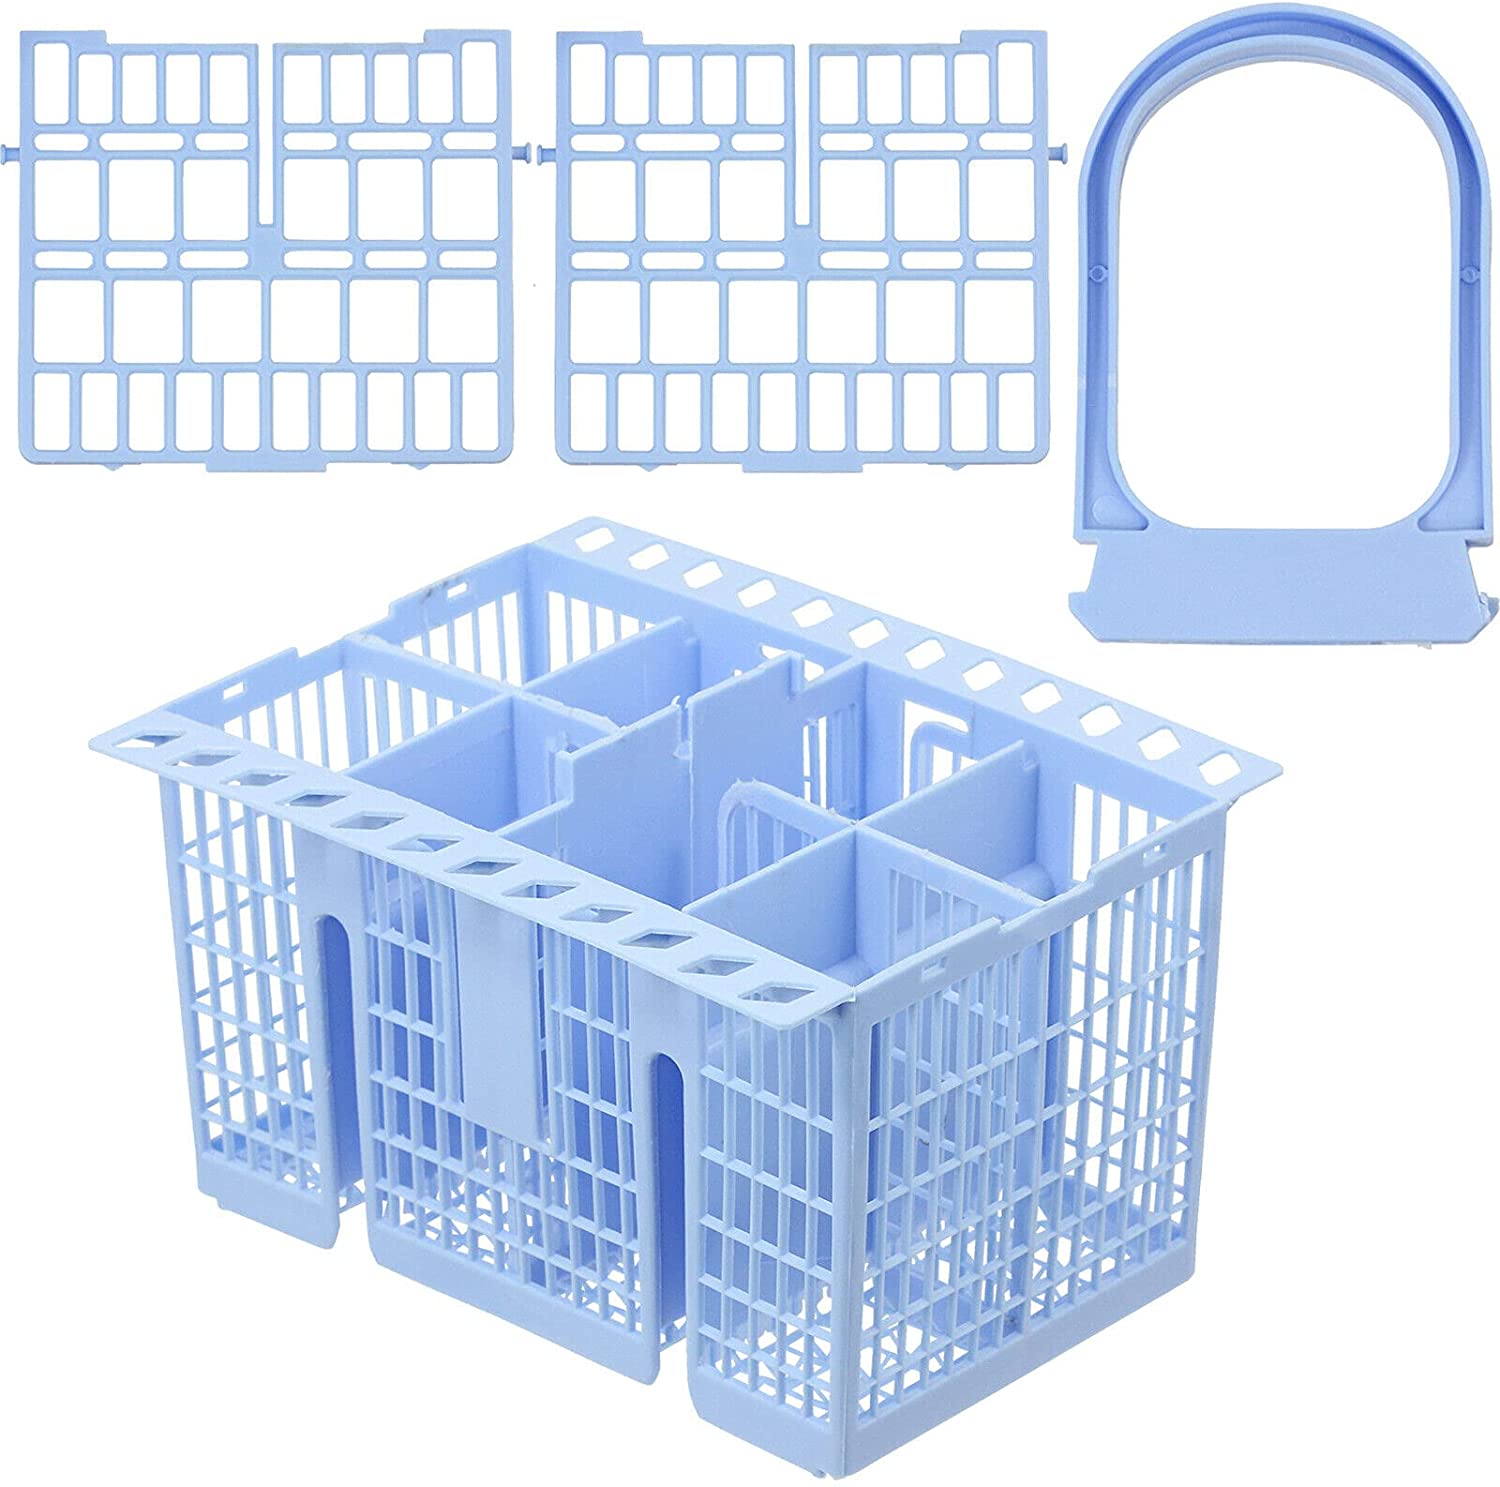 SPARES2GO Cutlery Basket compatible with Fagor Dishwasher (Blue, 220 x 208 x 160mm)